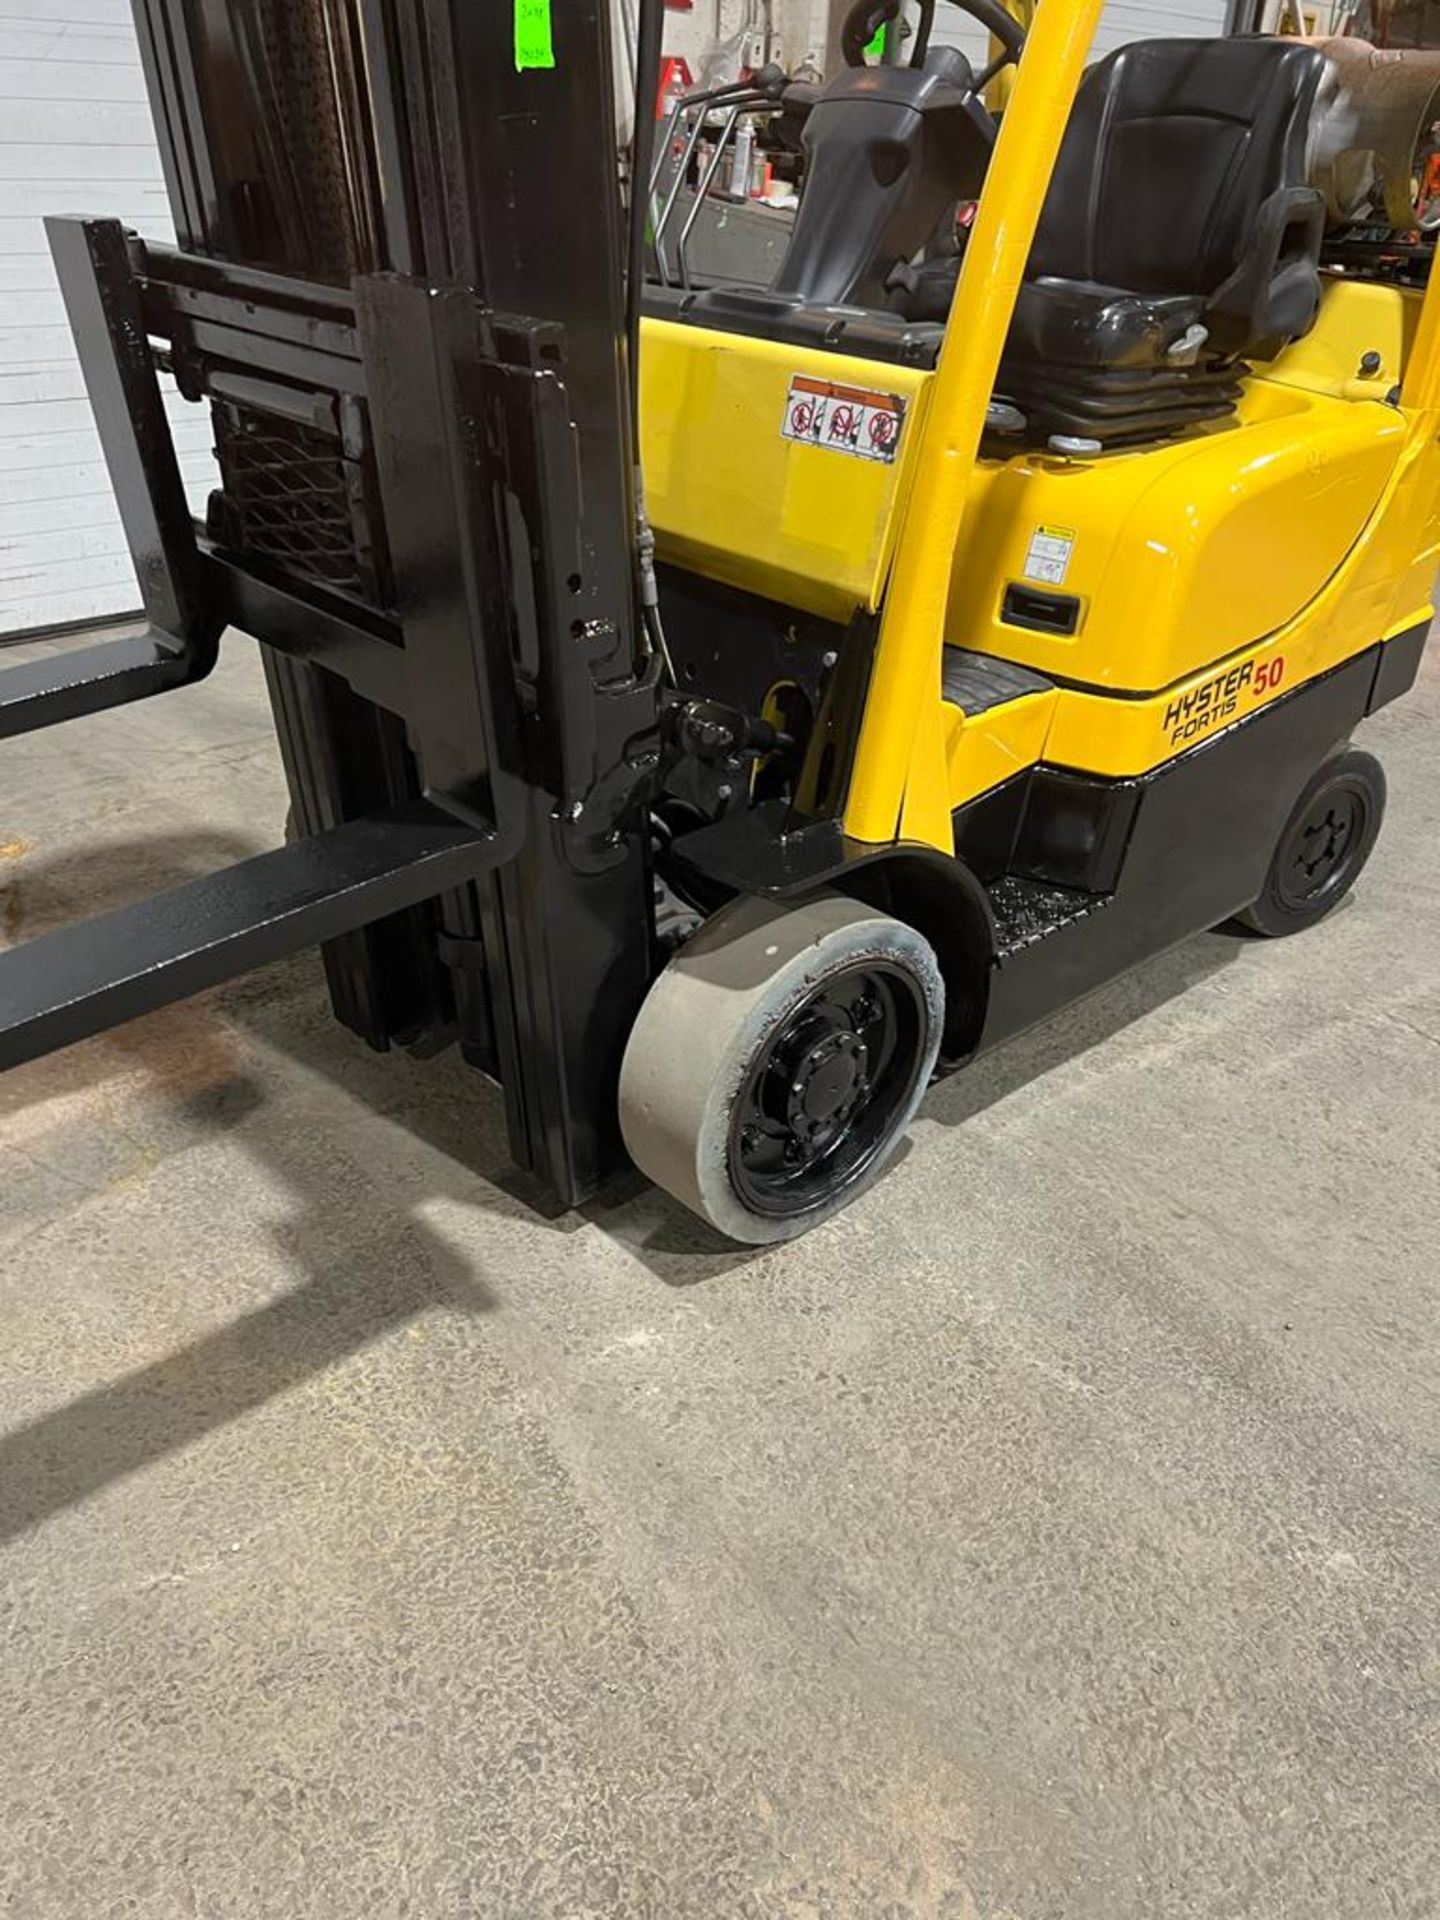 NICE 2015 Hyster model 50 - 5,000lbs Capacity Forklift LPG (Propane) with Sideshift - 3-stage - Image 3 of 4